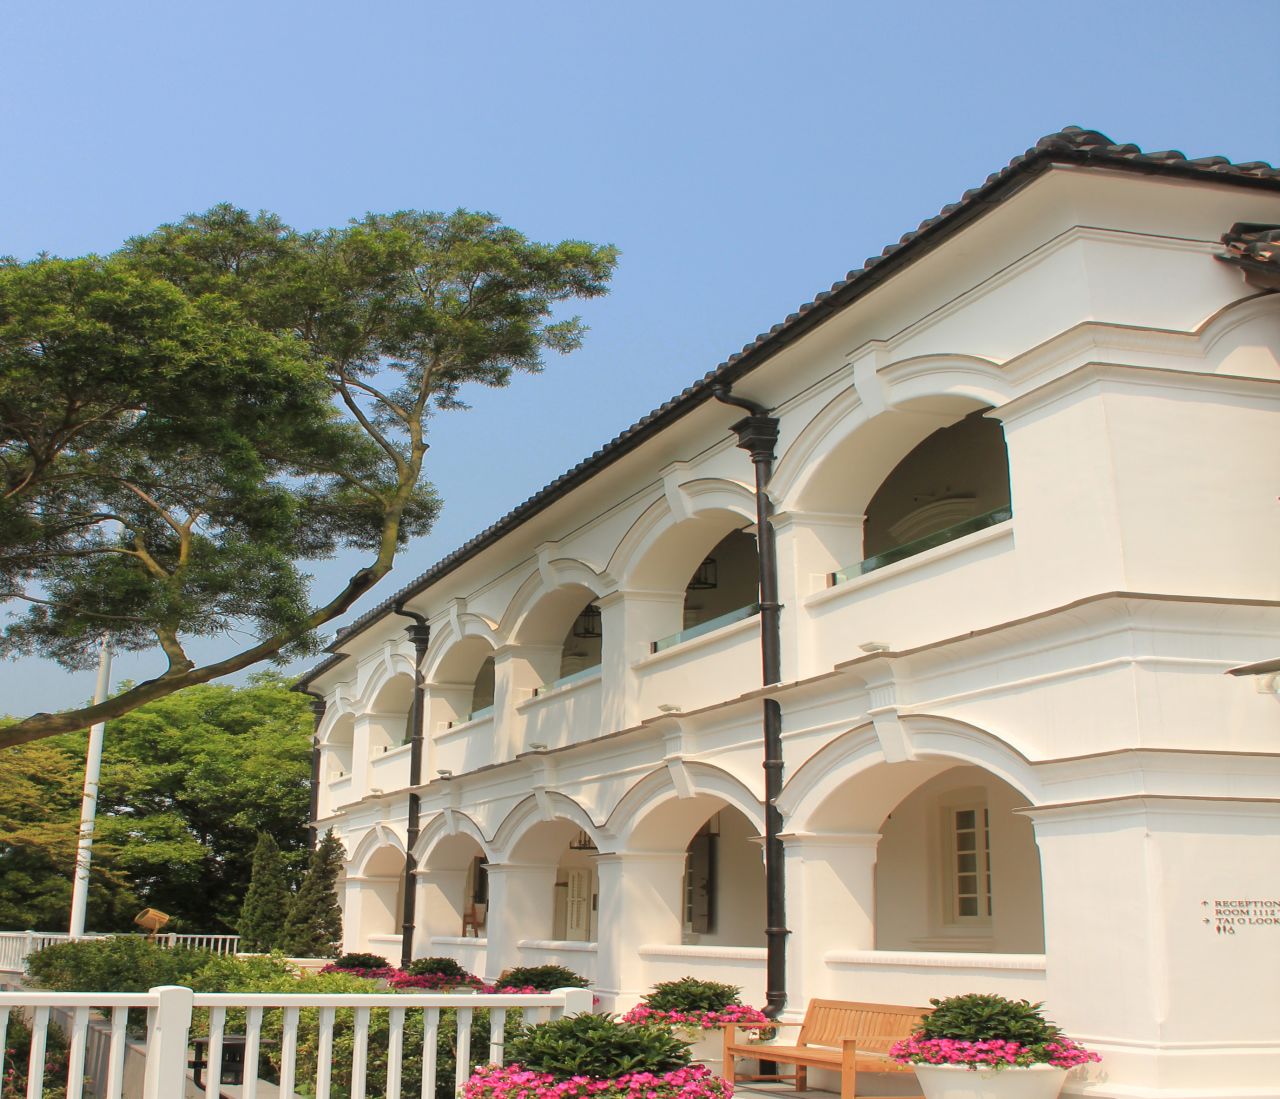 <strong>Tai O Heritage Hotel, Hong Kong: </strong>Tai O Heritage Hotel sits on the far western edge of Tai O on Lantau Island. Hugged by trees, the colonial-style white building was built in 1902 and originally used as the Tai O Police Station.